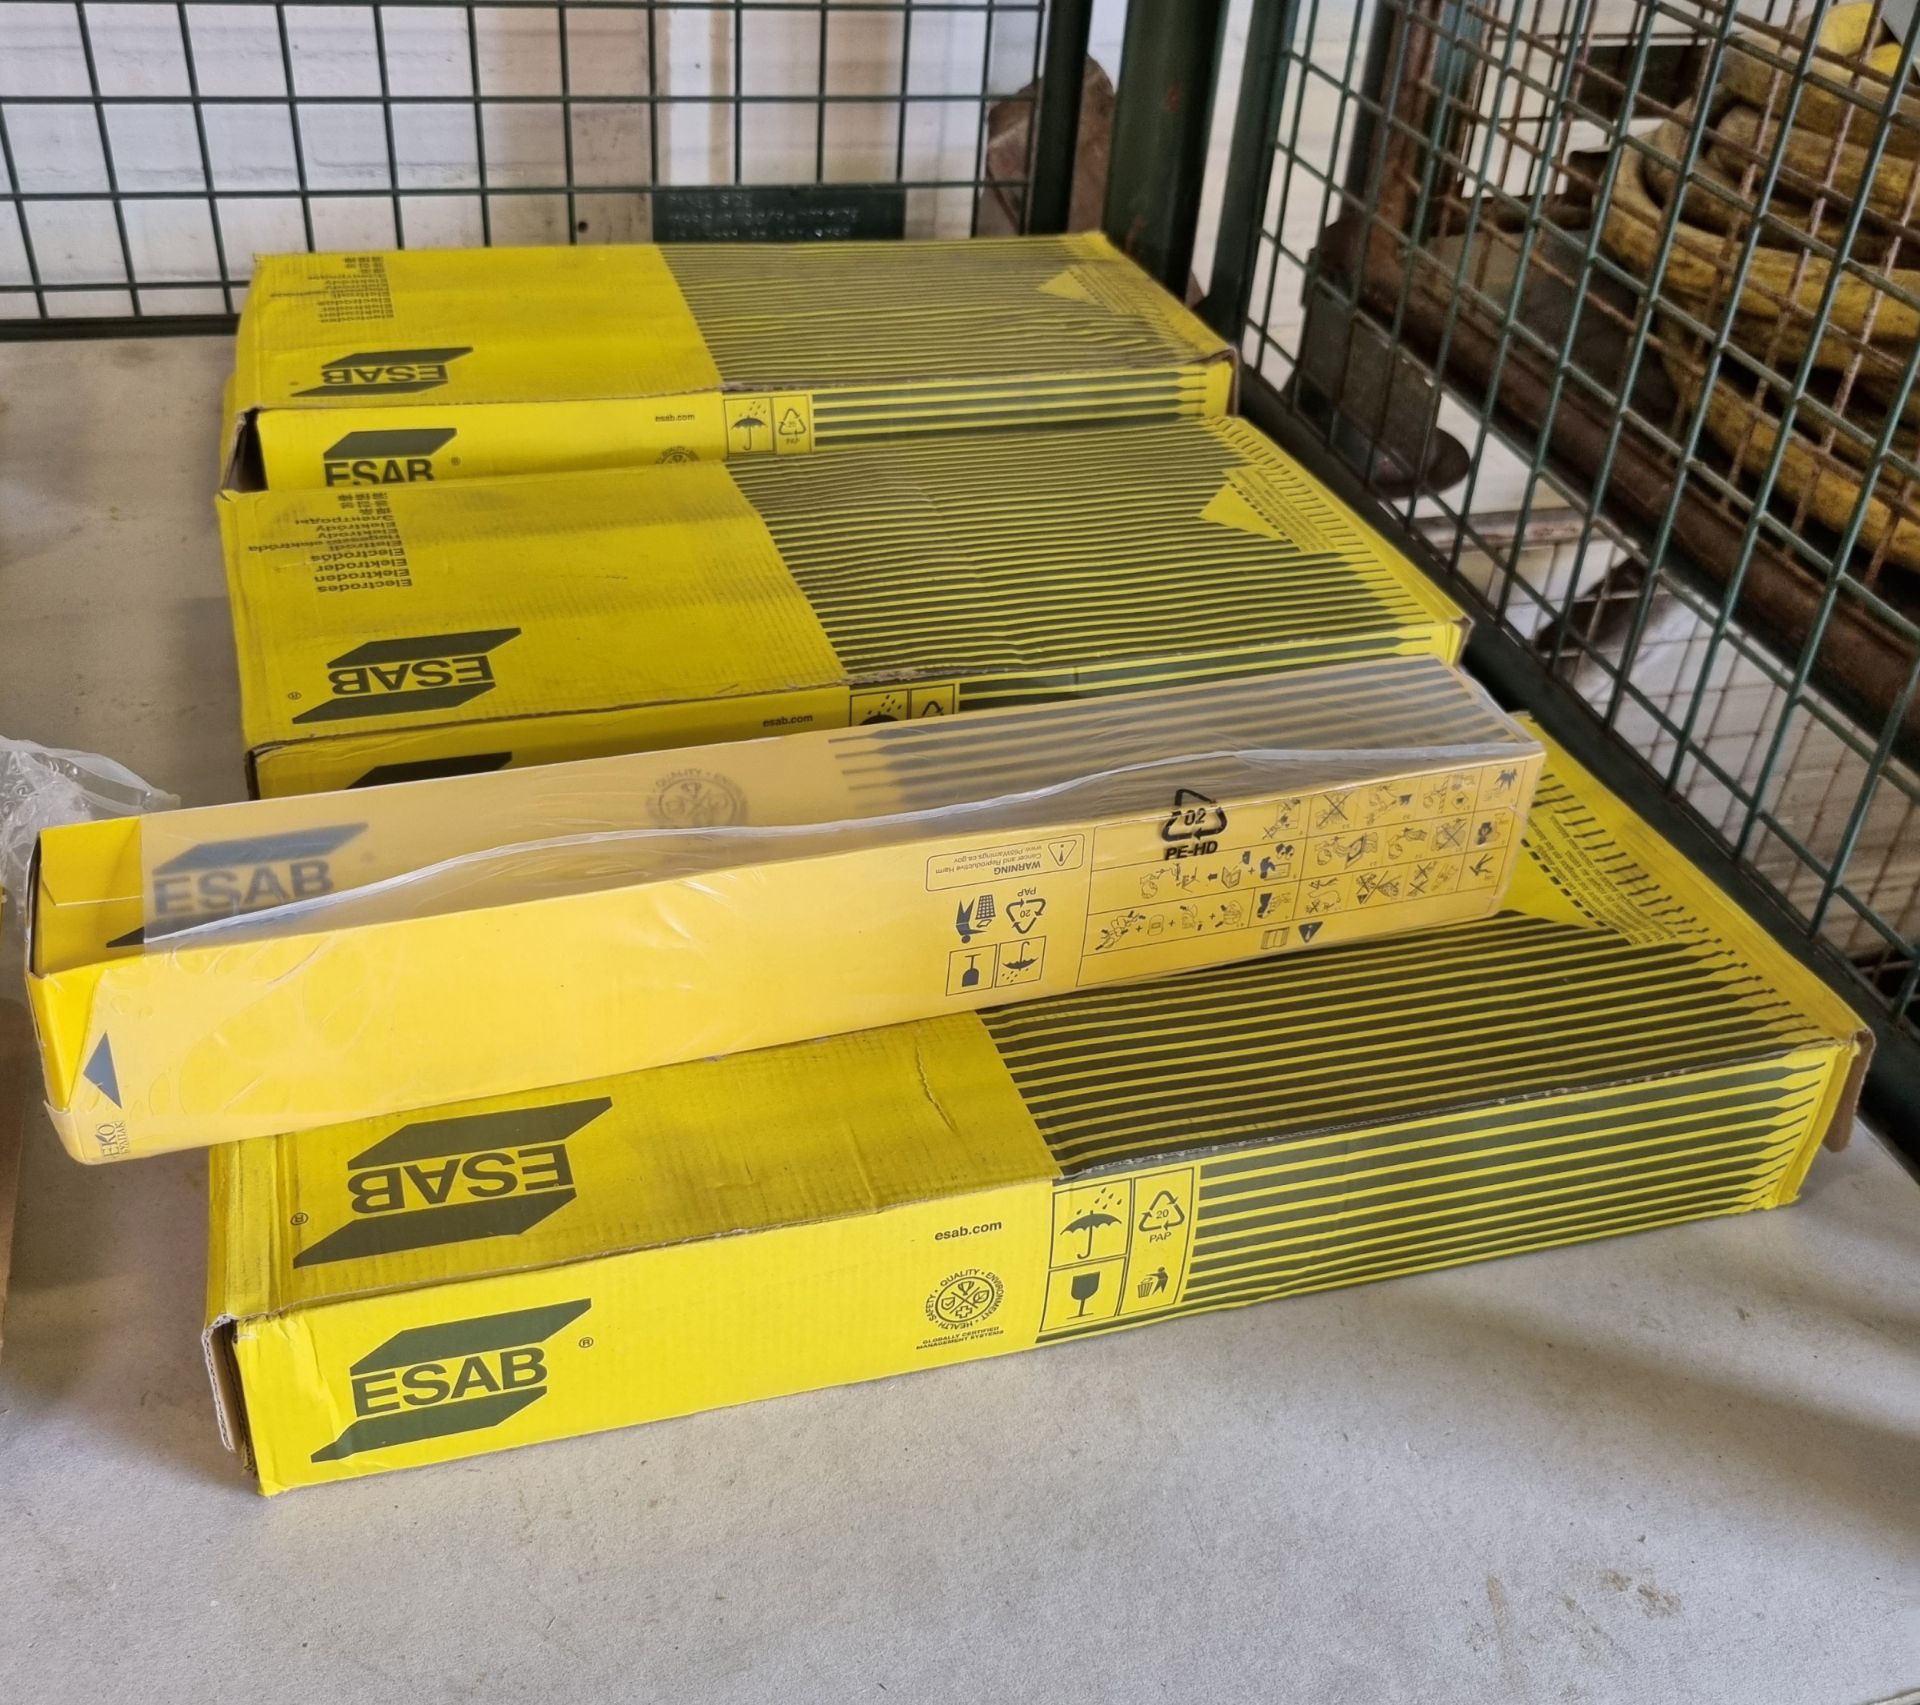 ESAB Welding rods - 4.0 x 450mm 21.3 kg - 6 boxes - Image 3 of 4